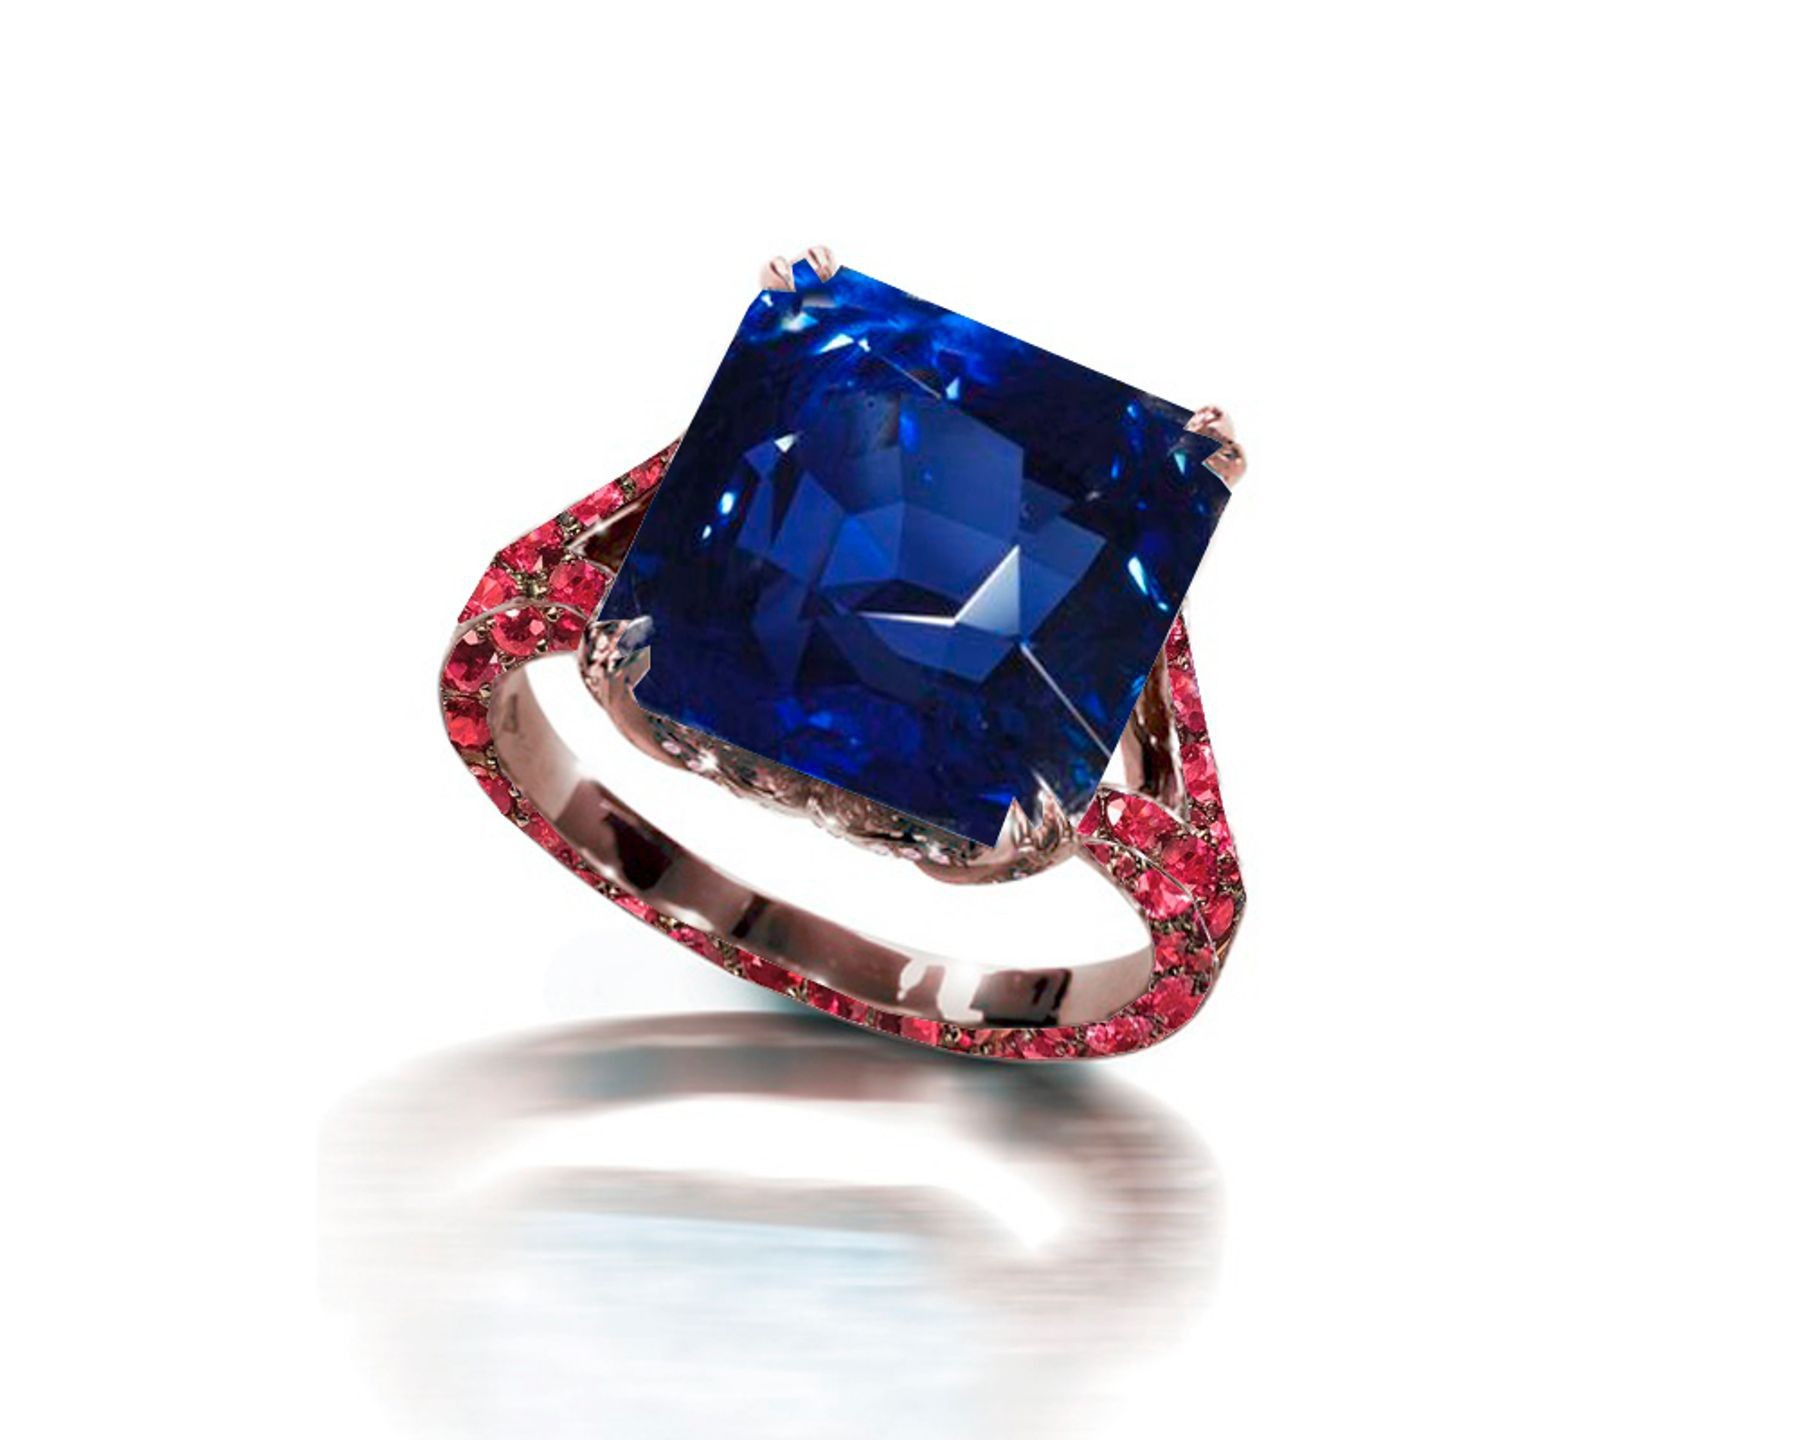 Shop Online Ring with Blue Sapphire & Pave Set Rubies in Gold or Platinum Global Shipping